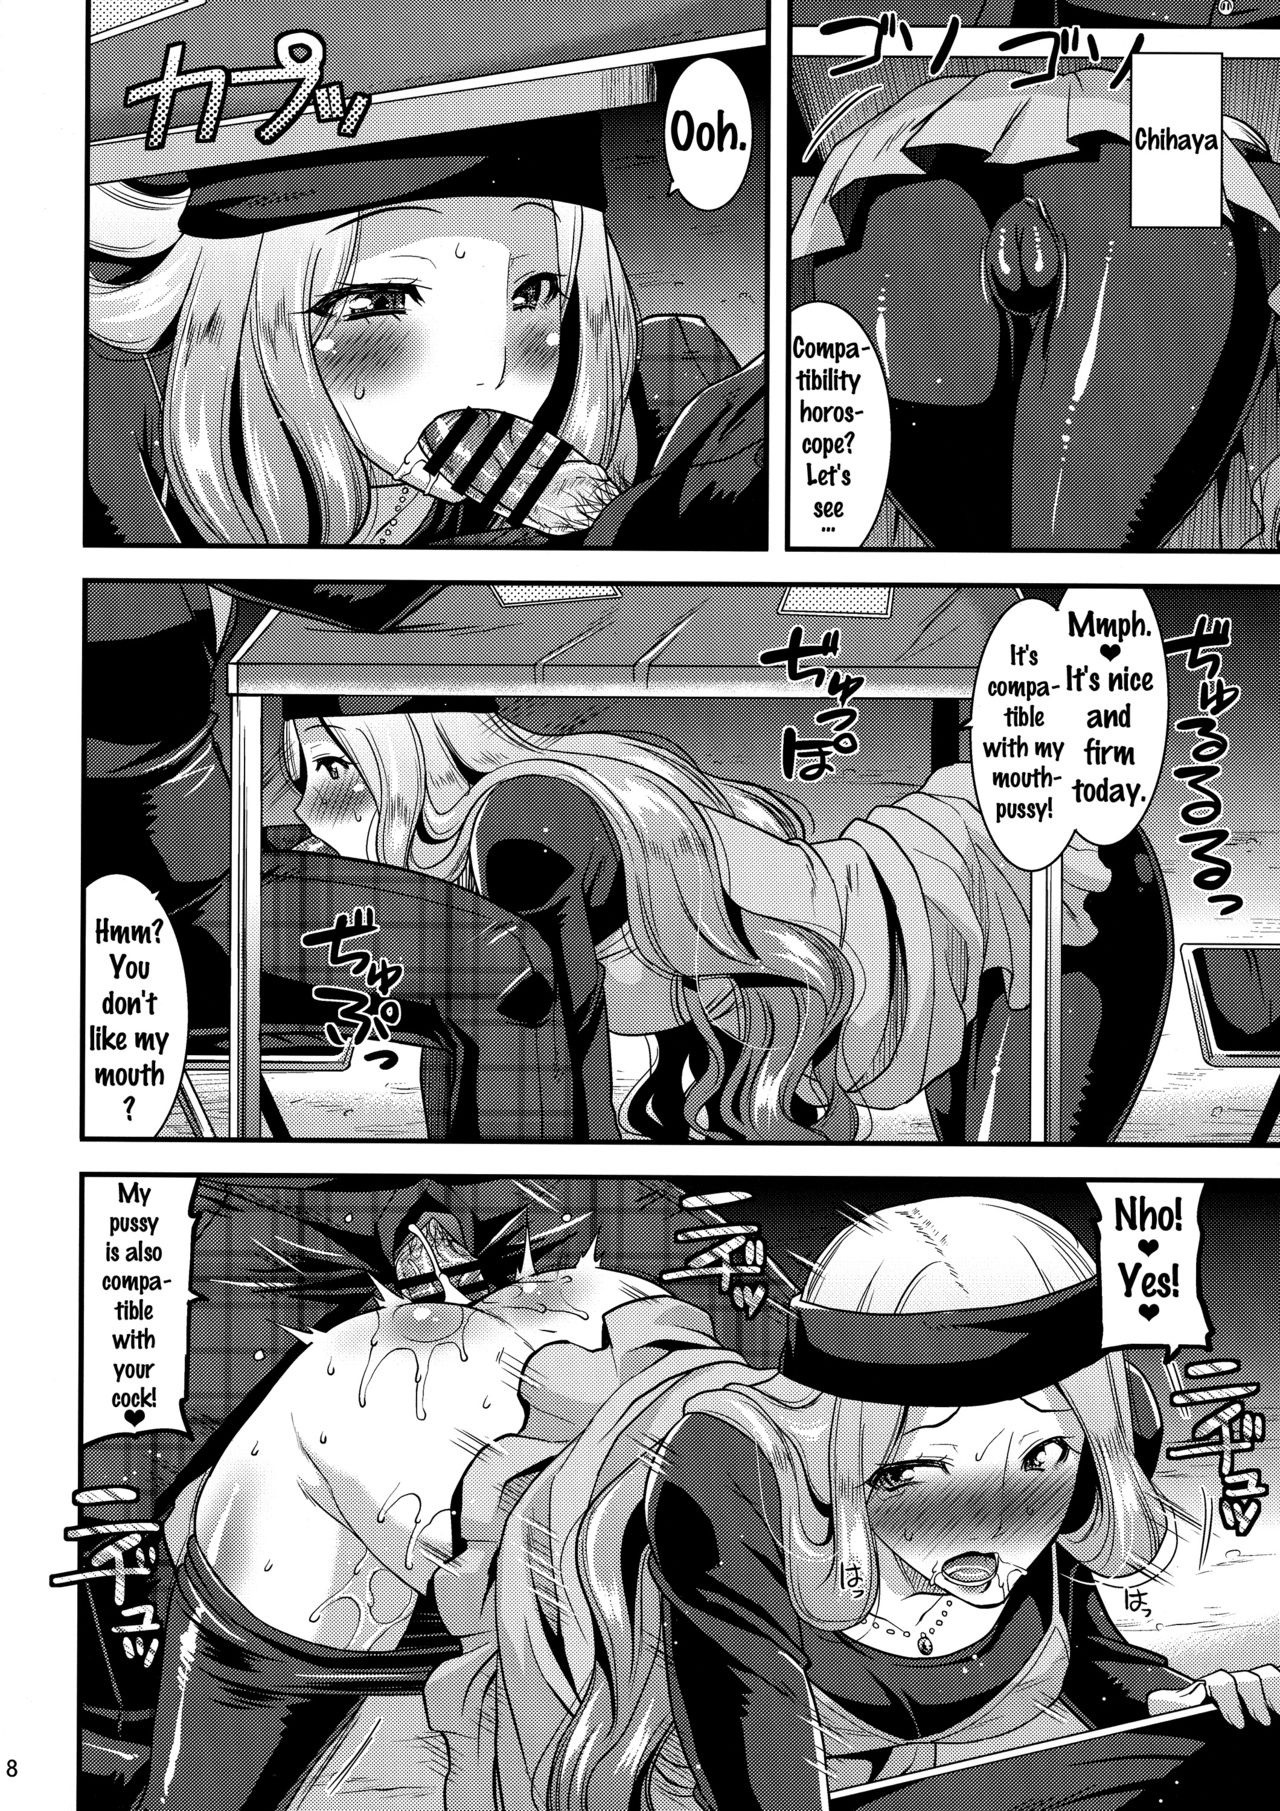 LET US START THE SEX hentai manga picture 7